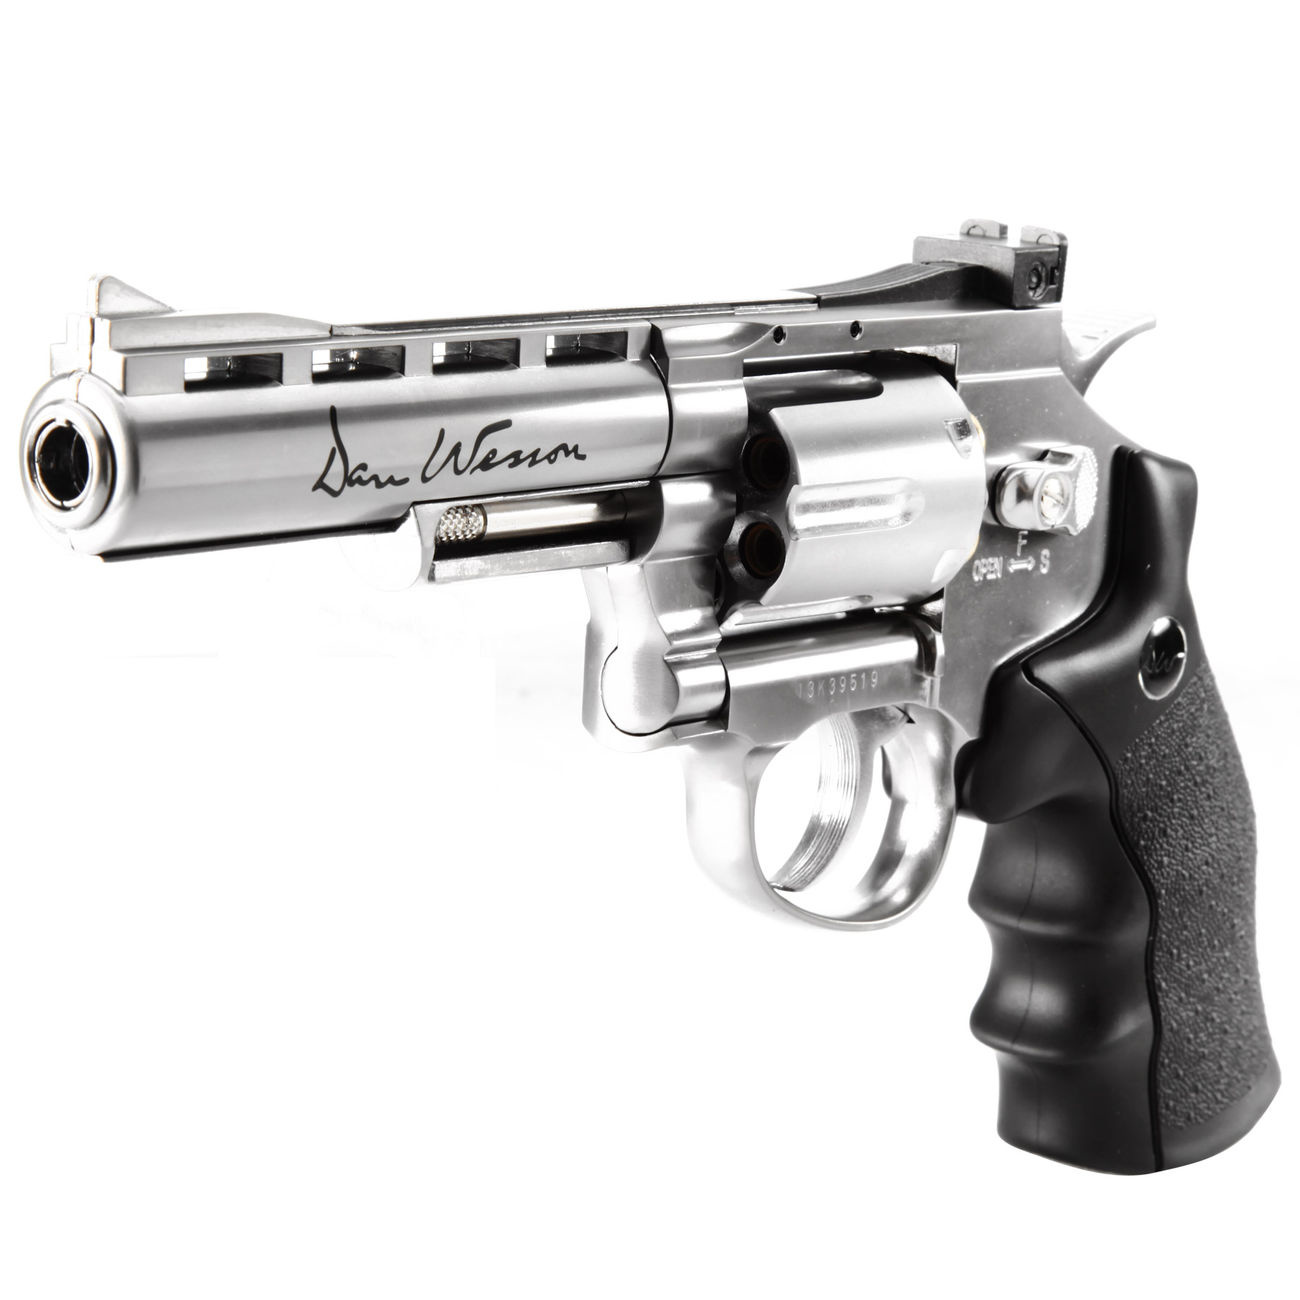 ASG 4 inch Dan Wesson Revolver Co2 NBB 1.80 Joule - Silver